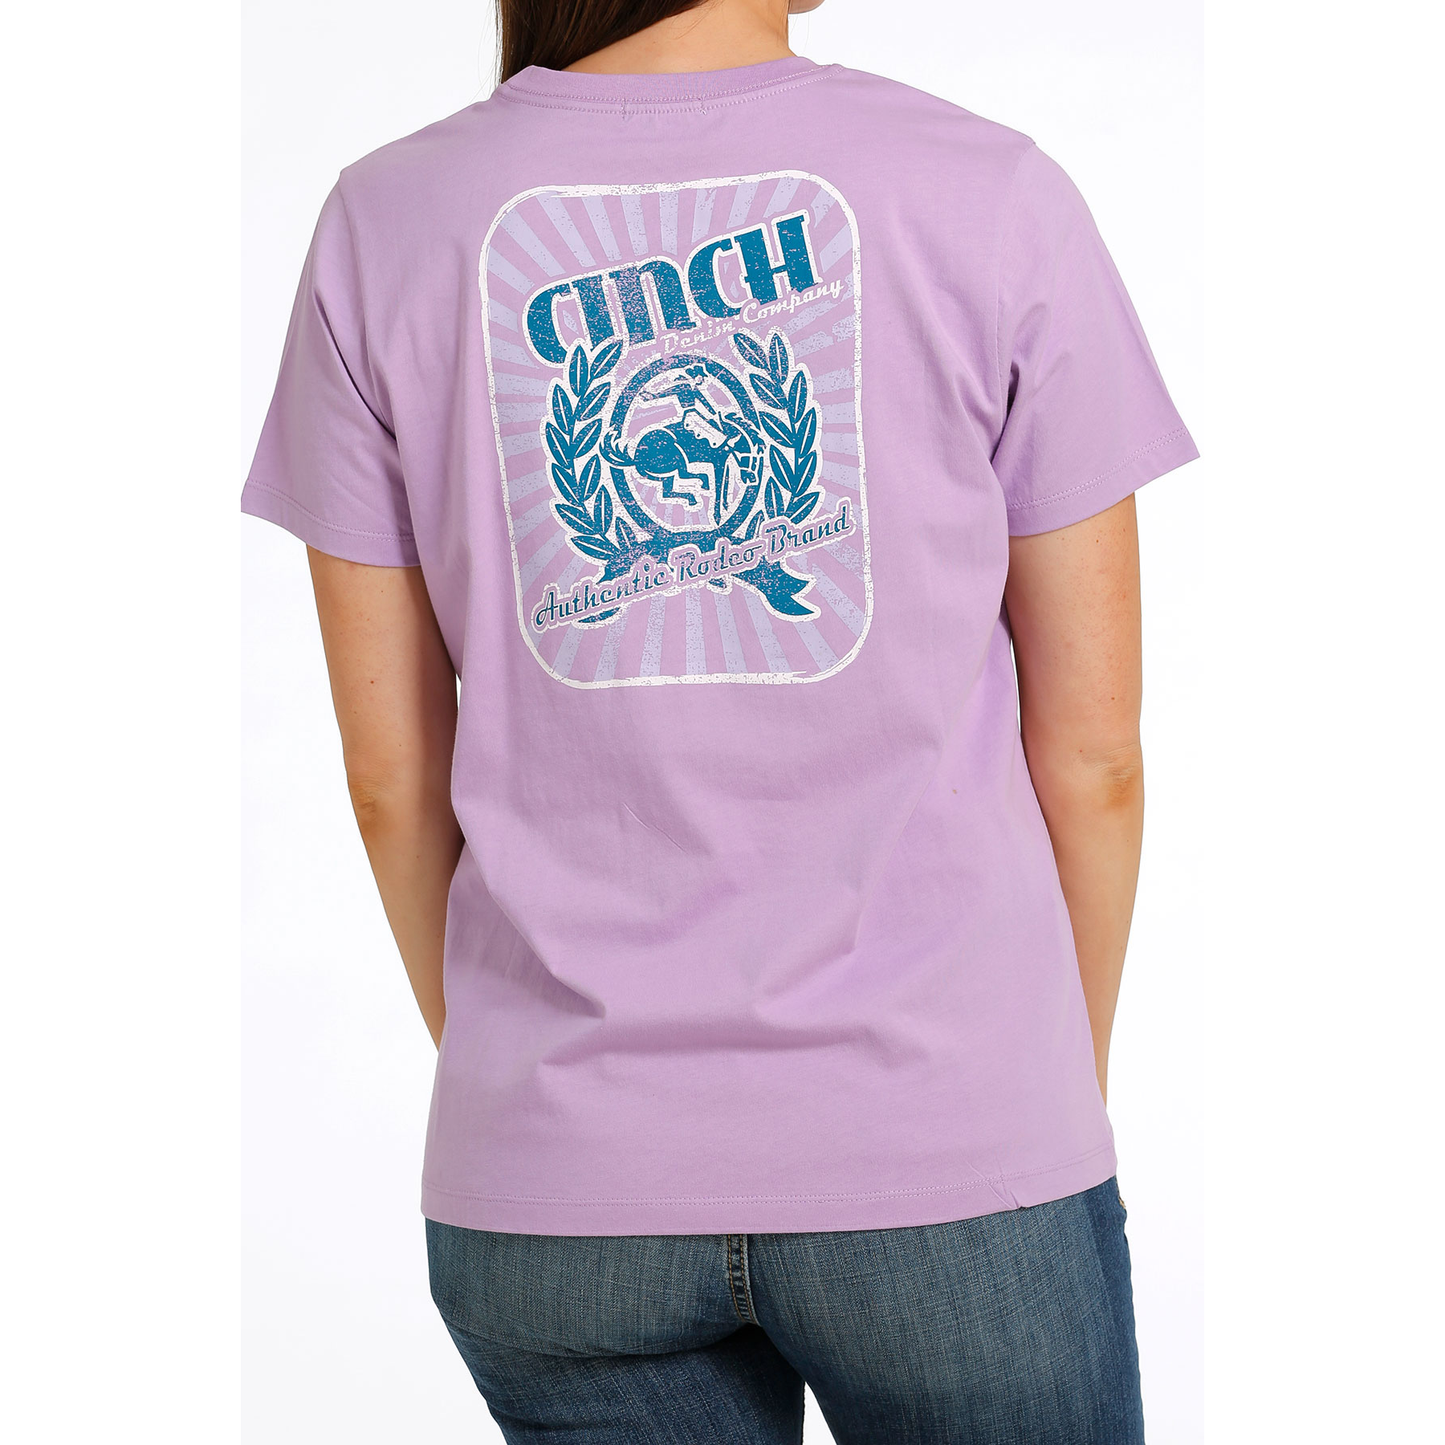 Cinch Ladies Lilac Rodeo Brand Graphic T-Shirt MSK7901003